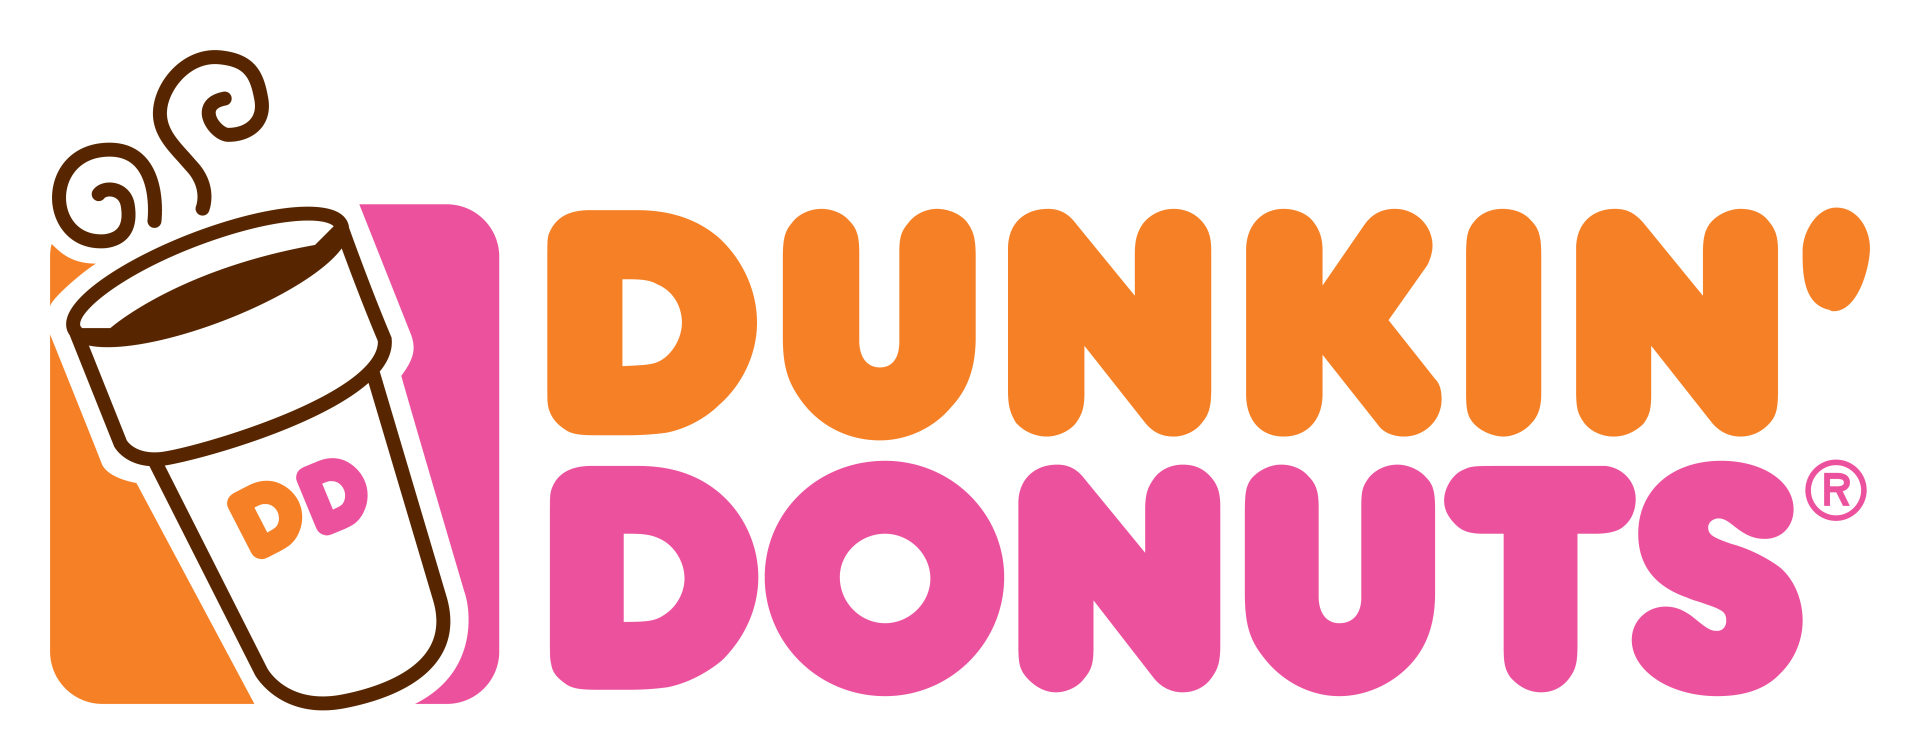 Dunkin Donuts HD Wallpaper Background Image